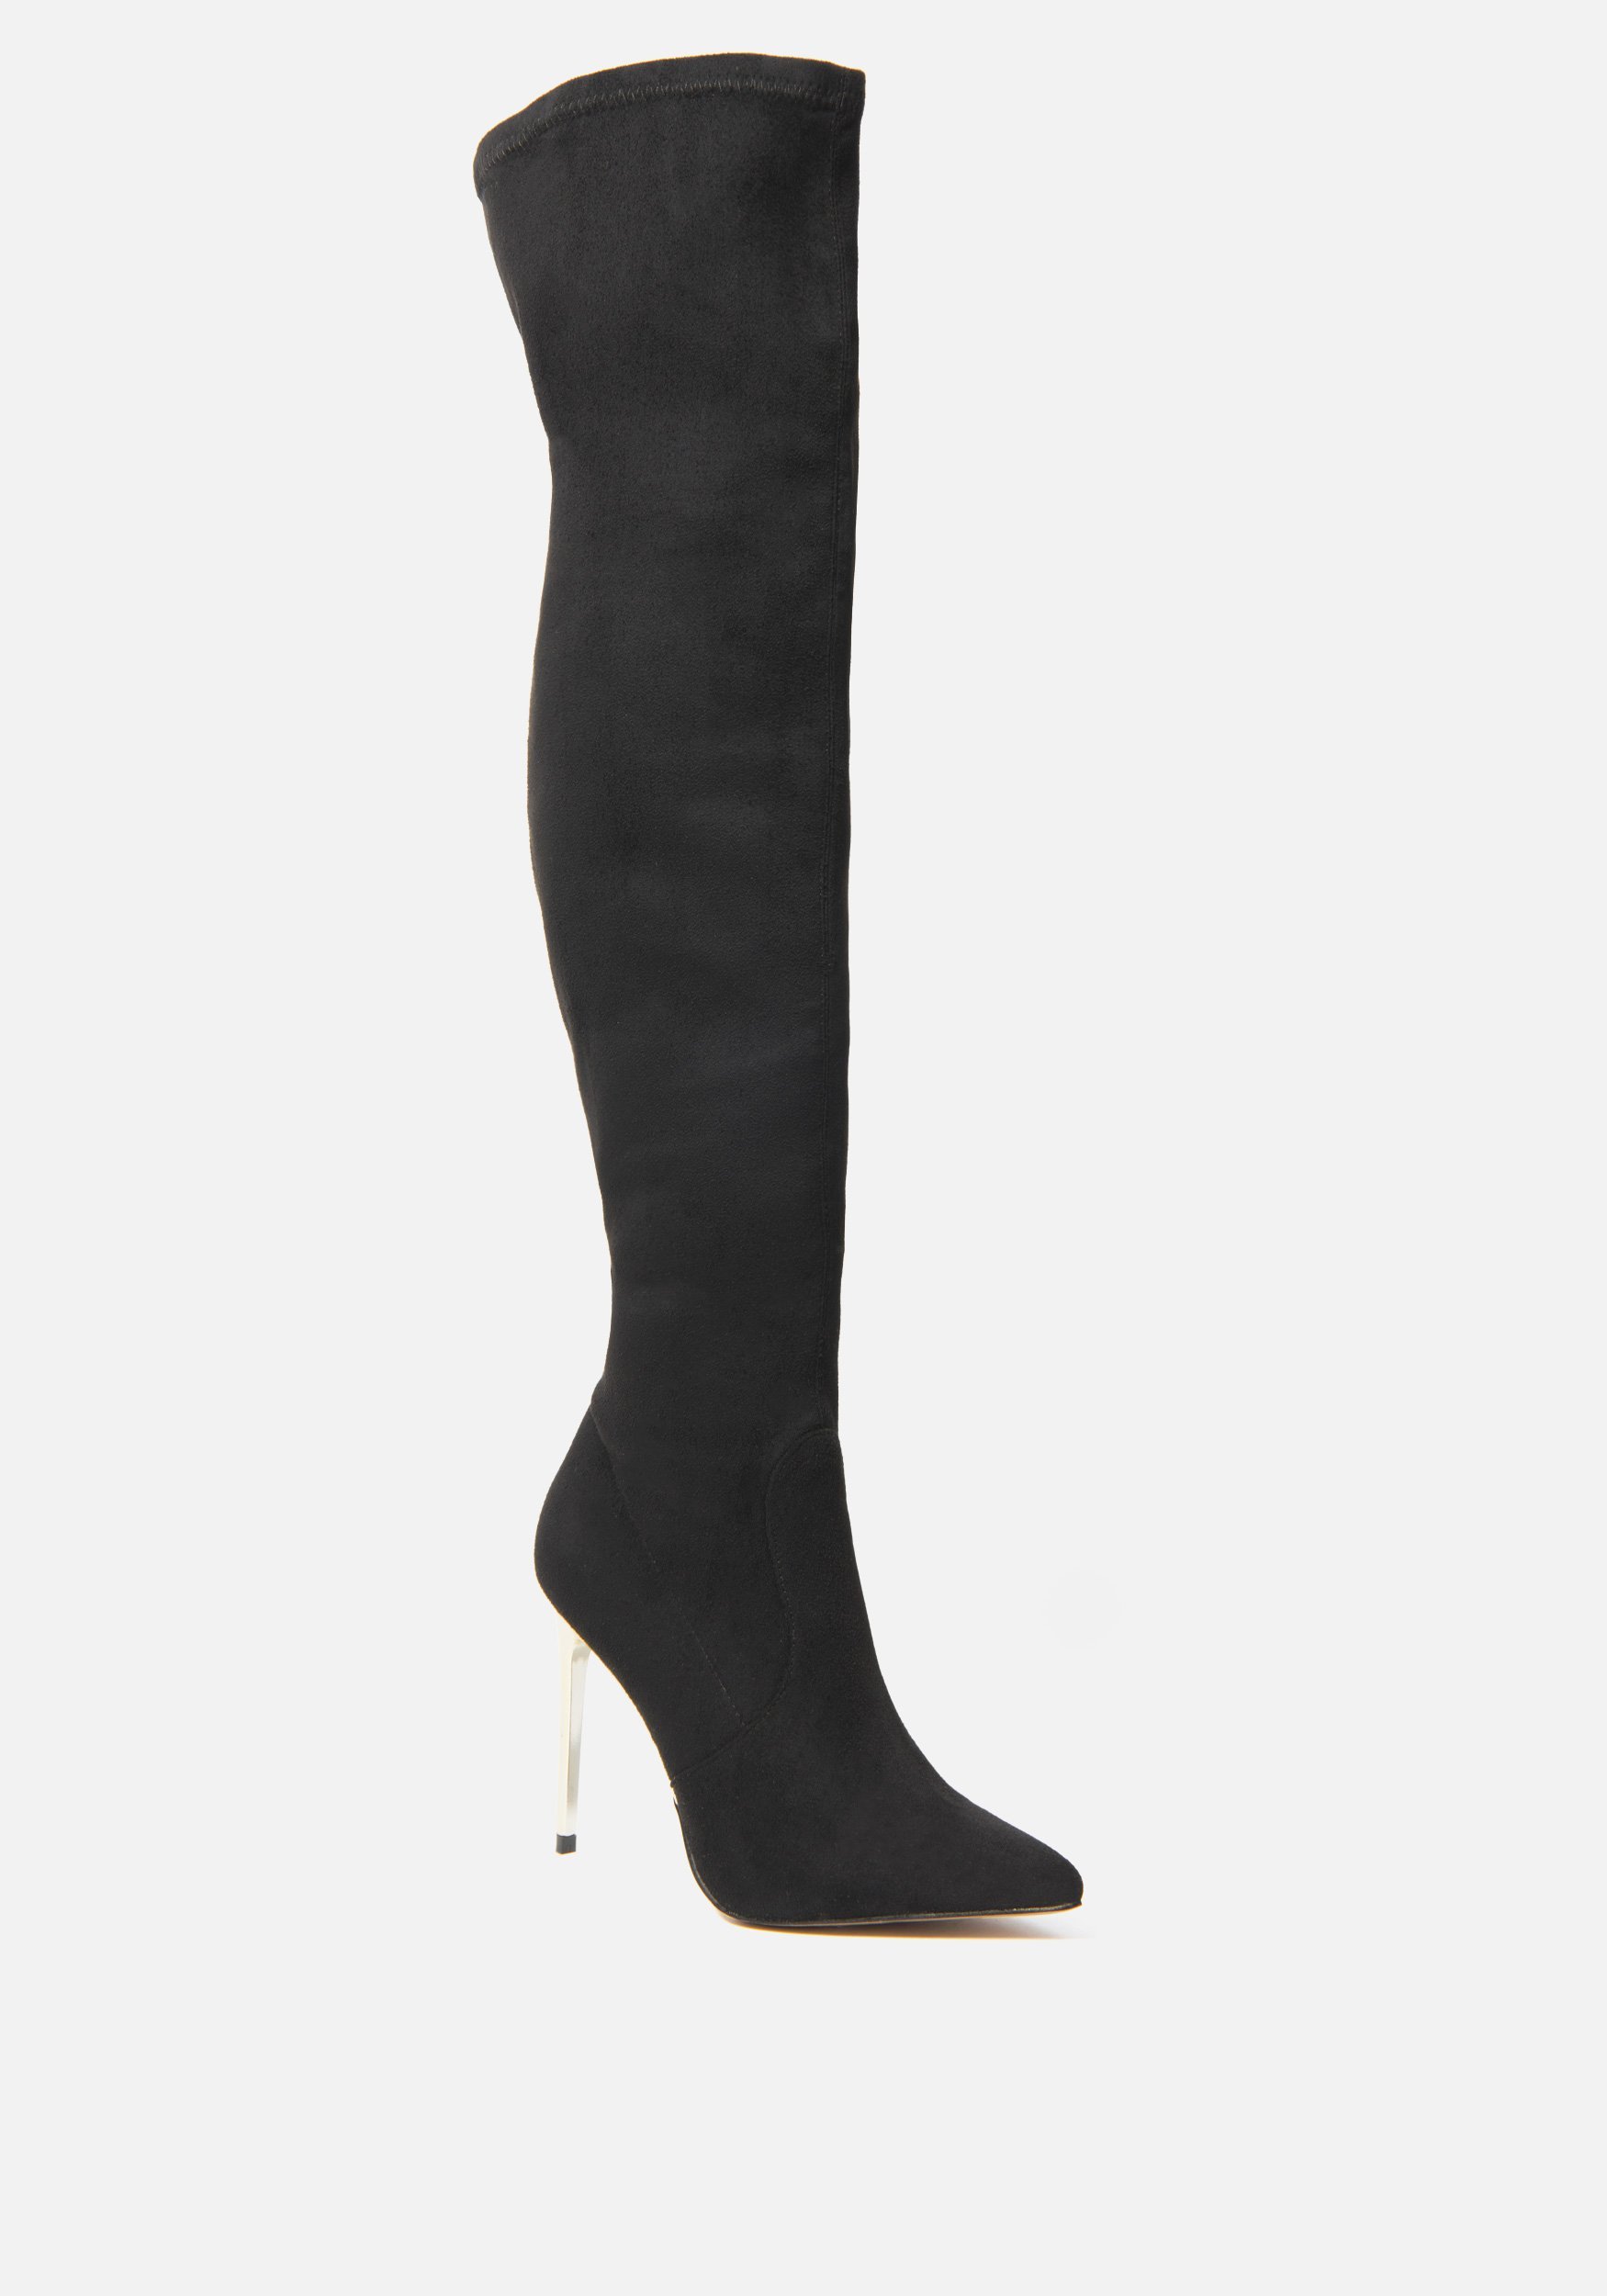 Bebe Women's Valirya Over the Knee Boots, Size 10.5 in BLACK SUEDE Synthetic